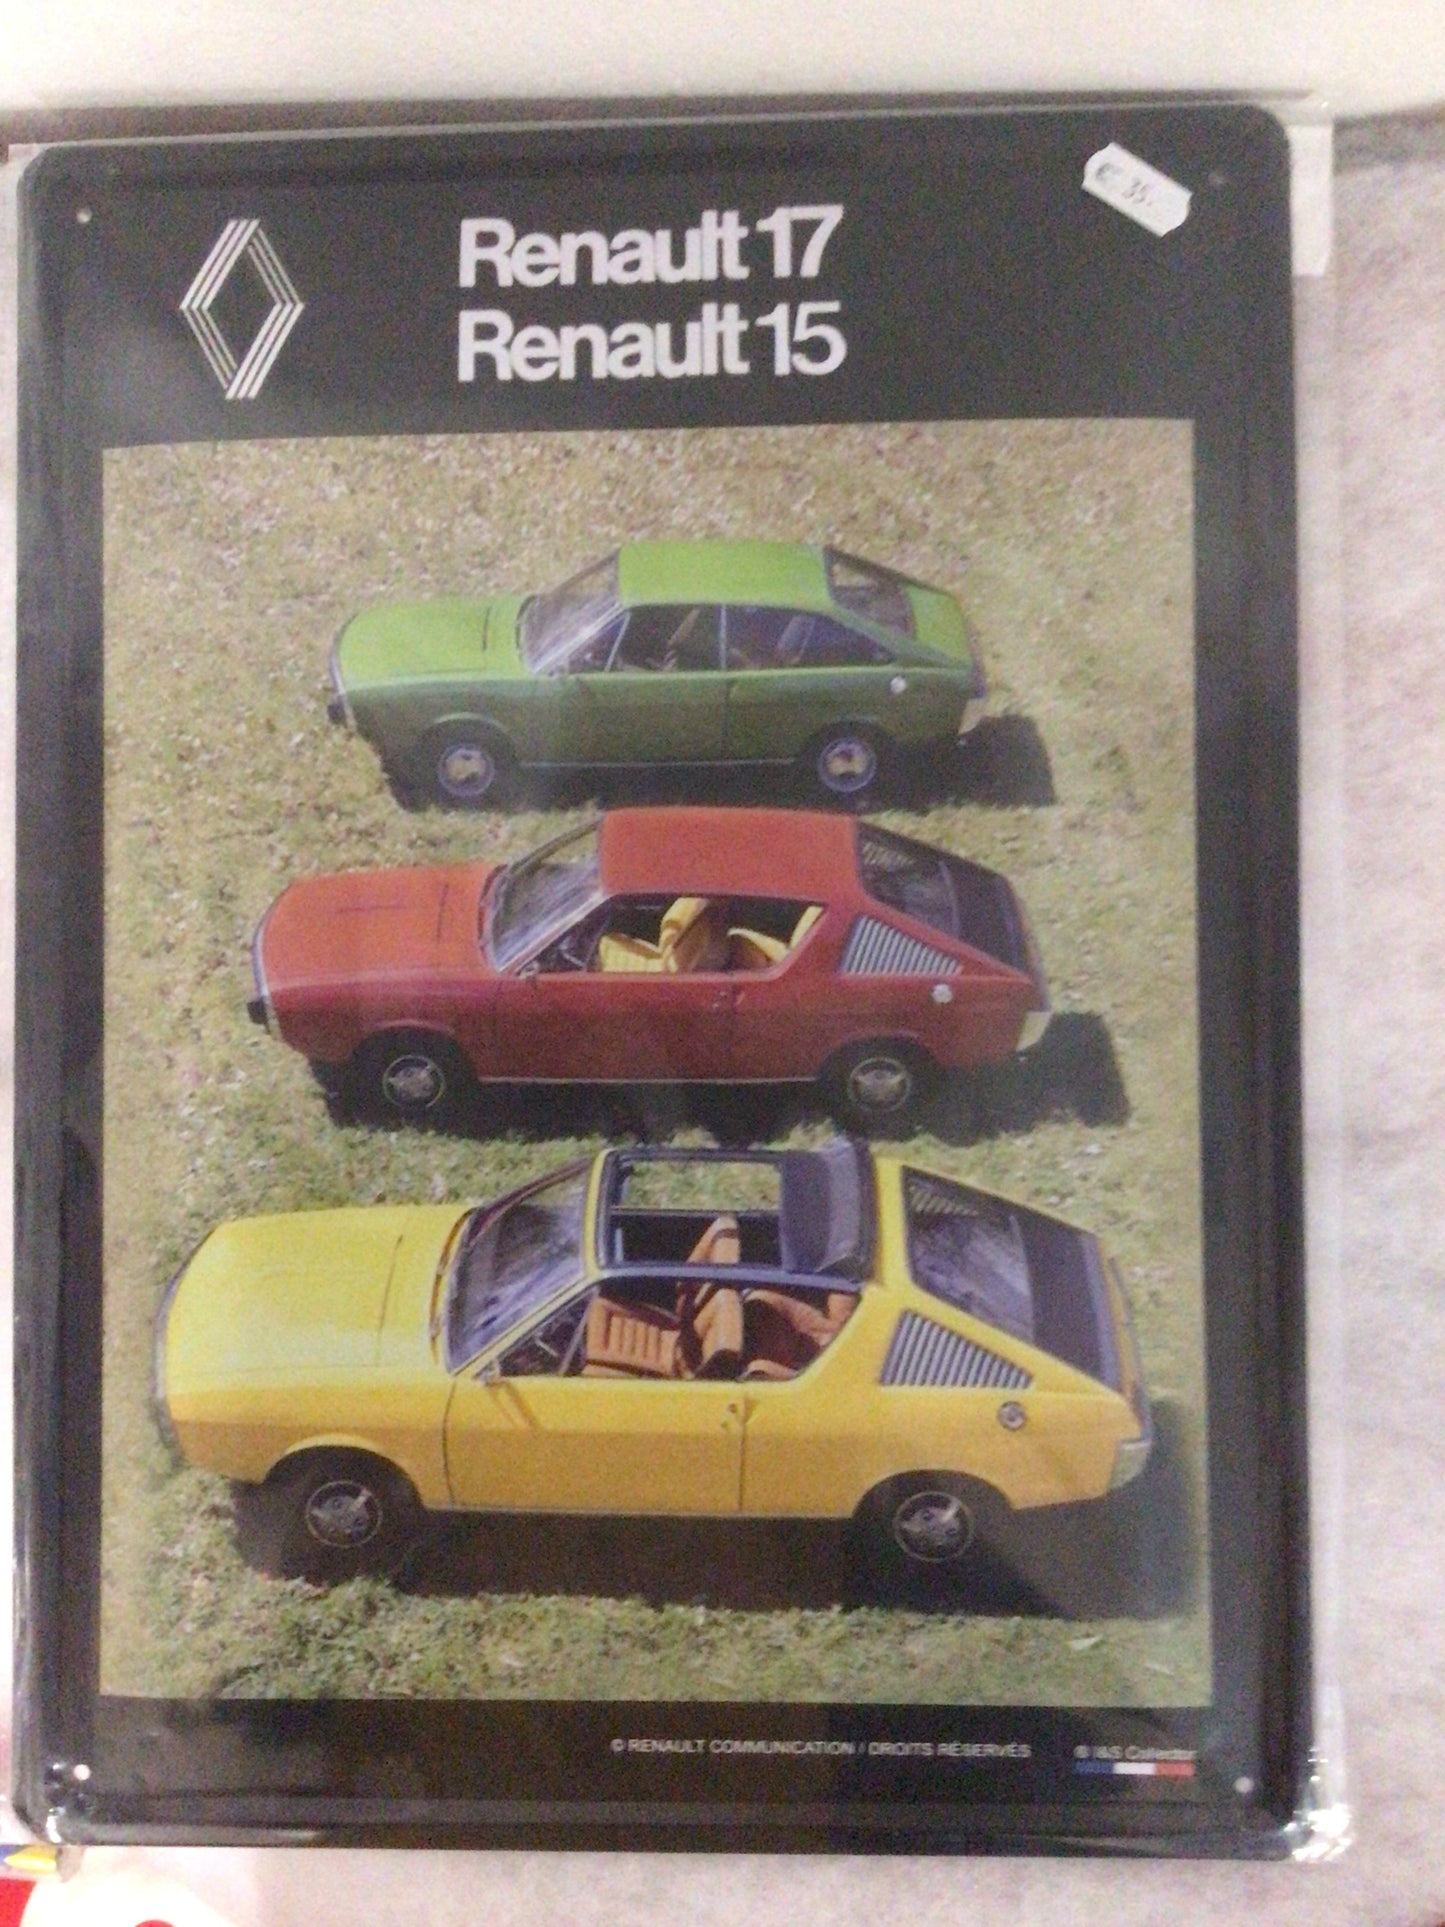 Renault plates with reliefs